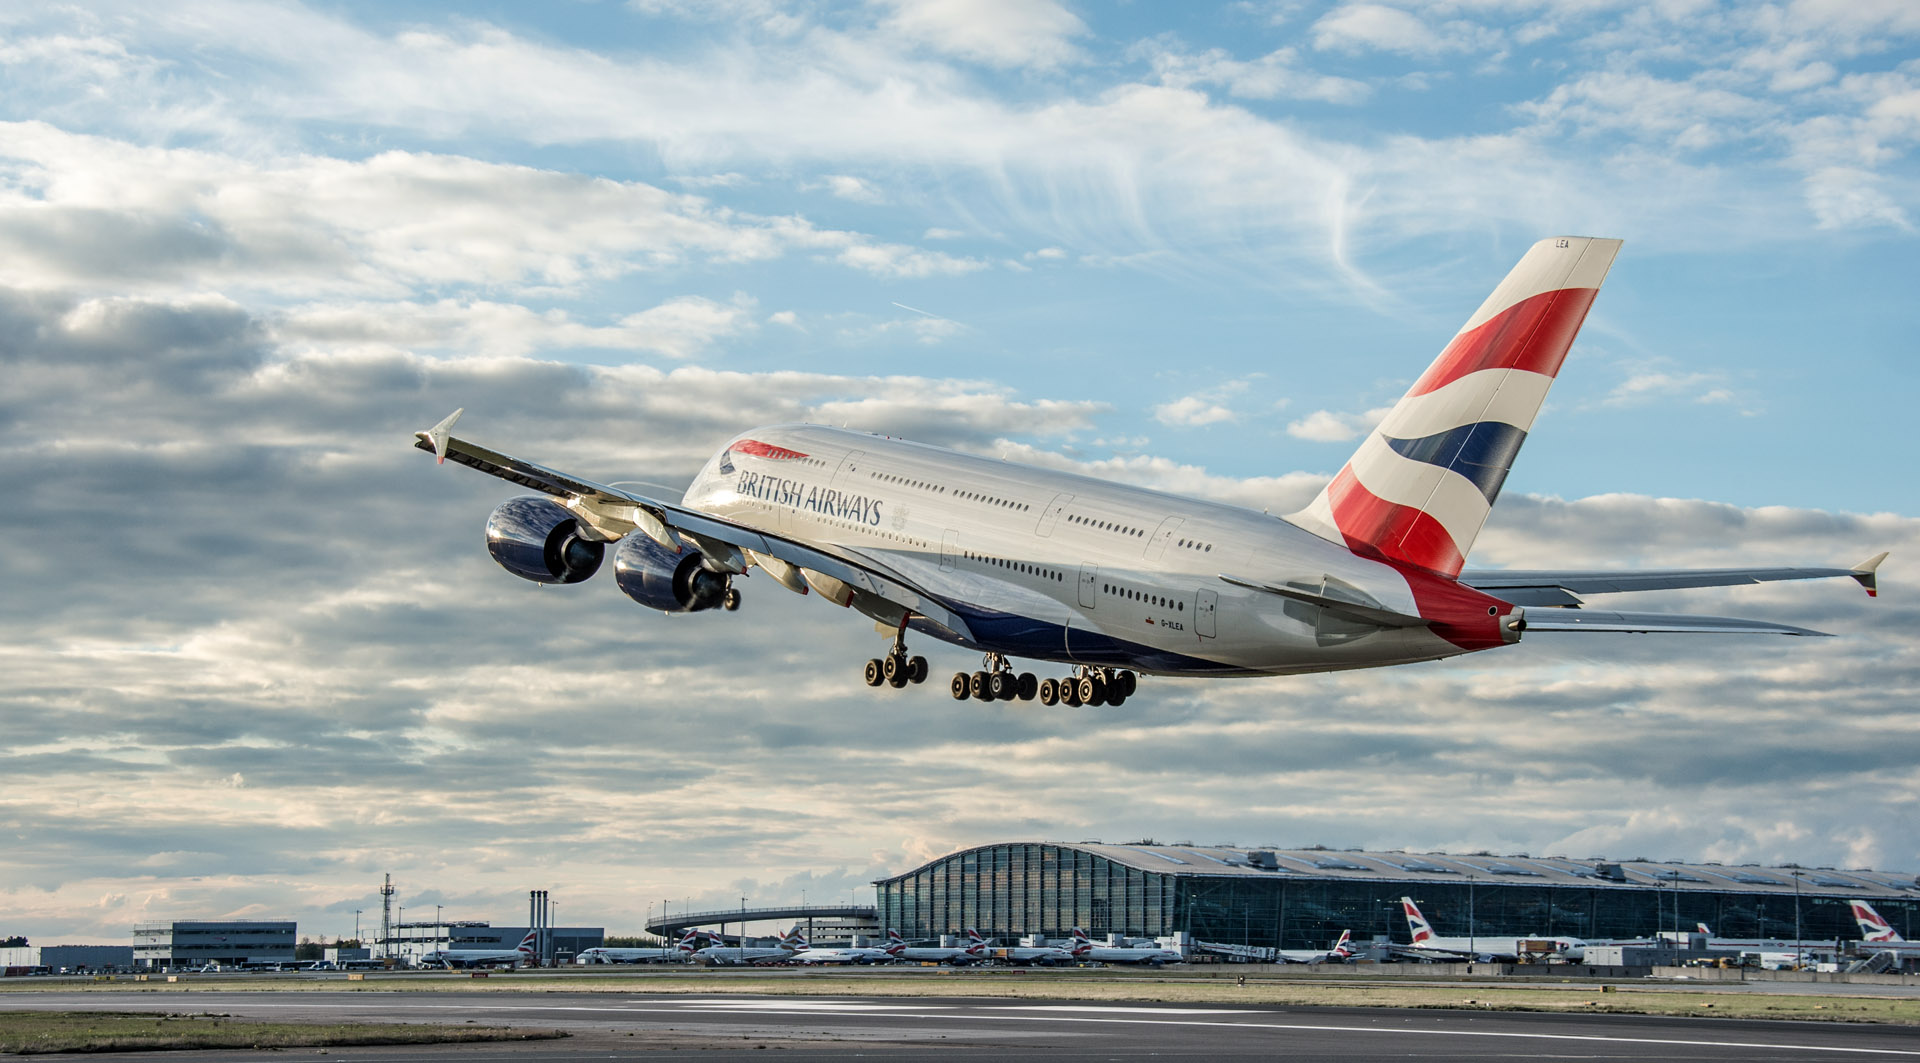 Nigel Milton, Heathrow Airport’s Chief of Staff & Carbon, wrote to International Airport Review about Heathrow’s 2.0 sustainability plans and how the plan will help future proof the airport for travellers.